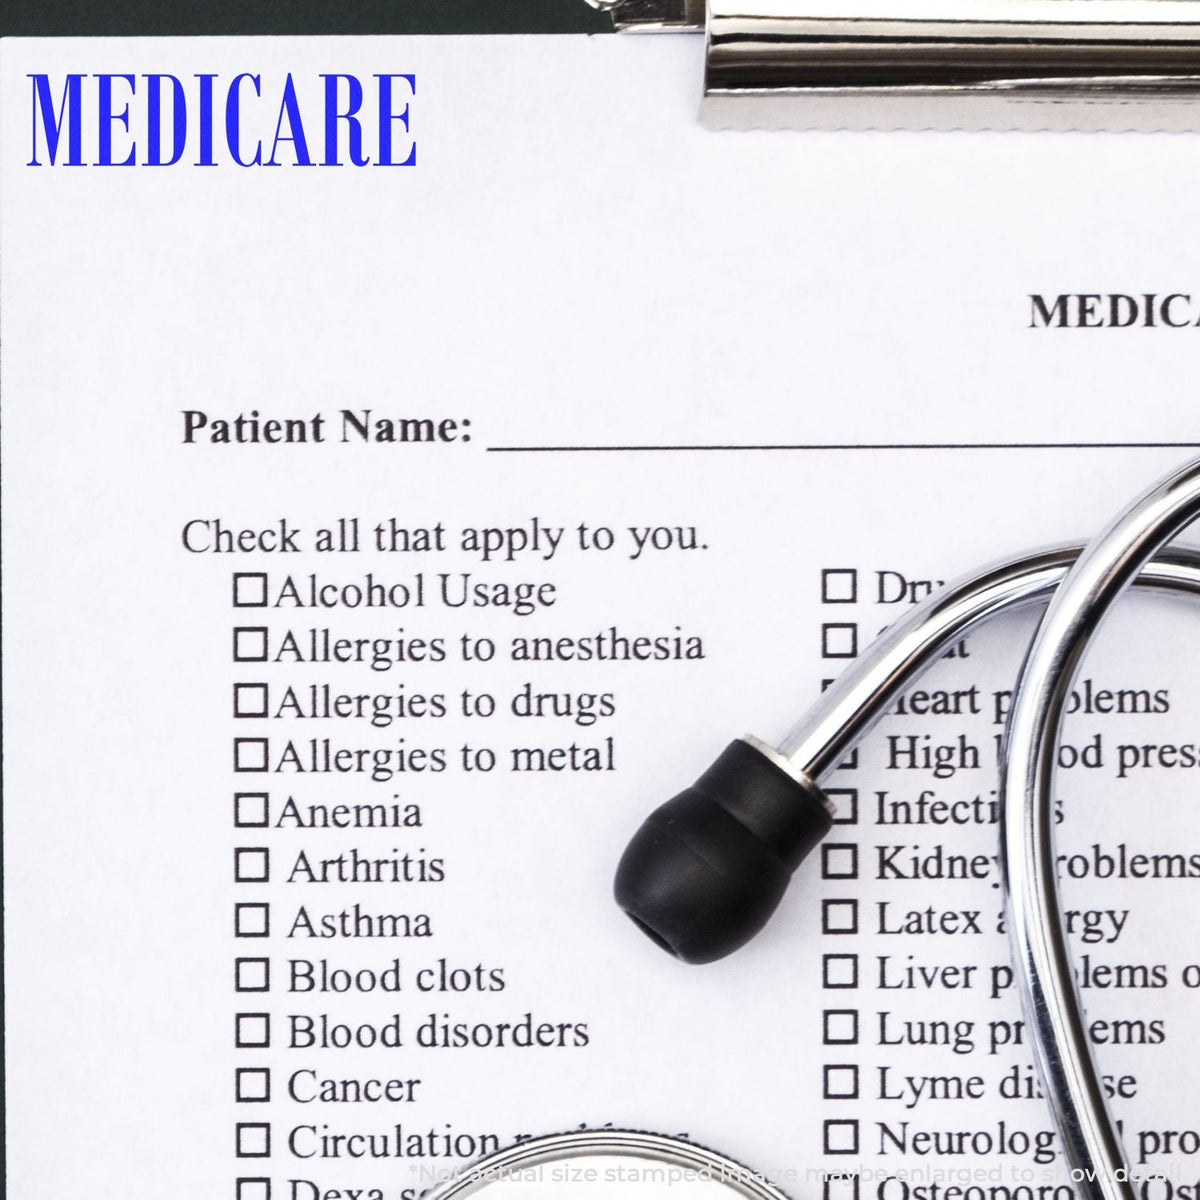 Self Inking Medicare Stamp In Use Photo